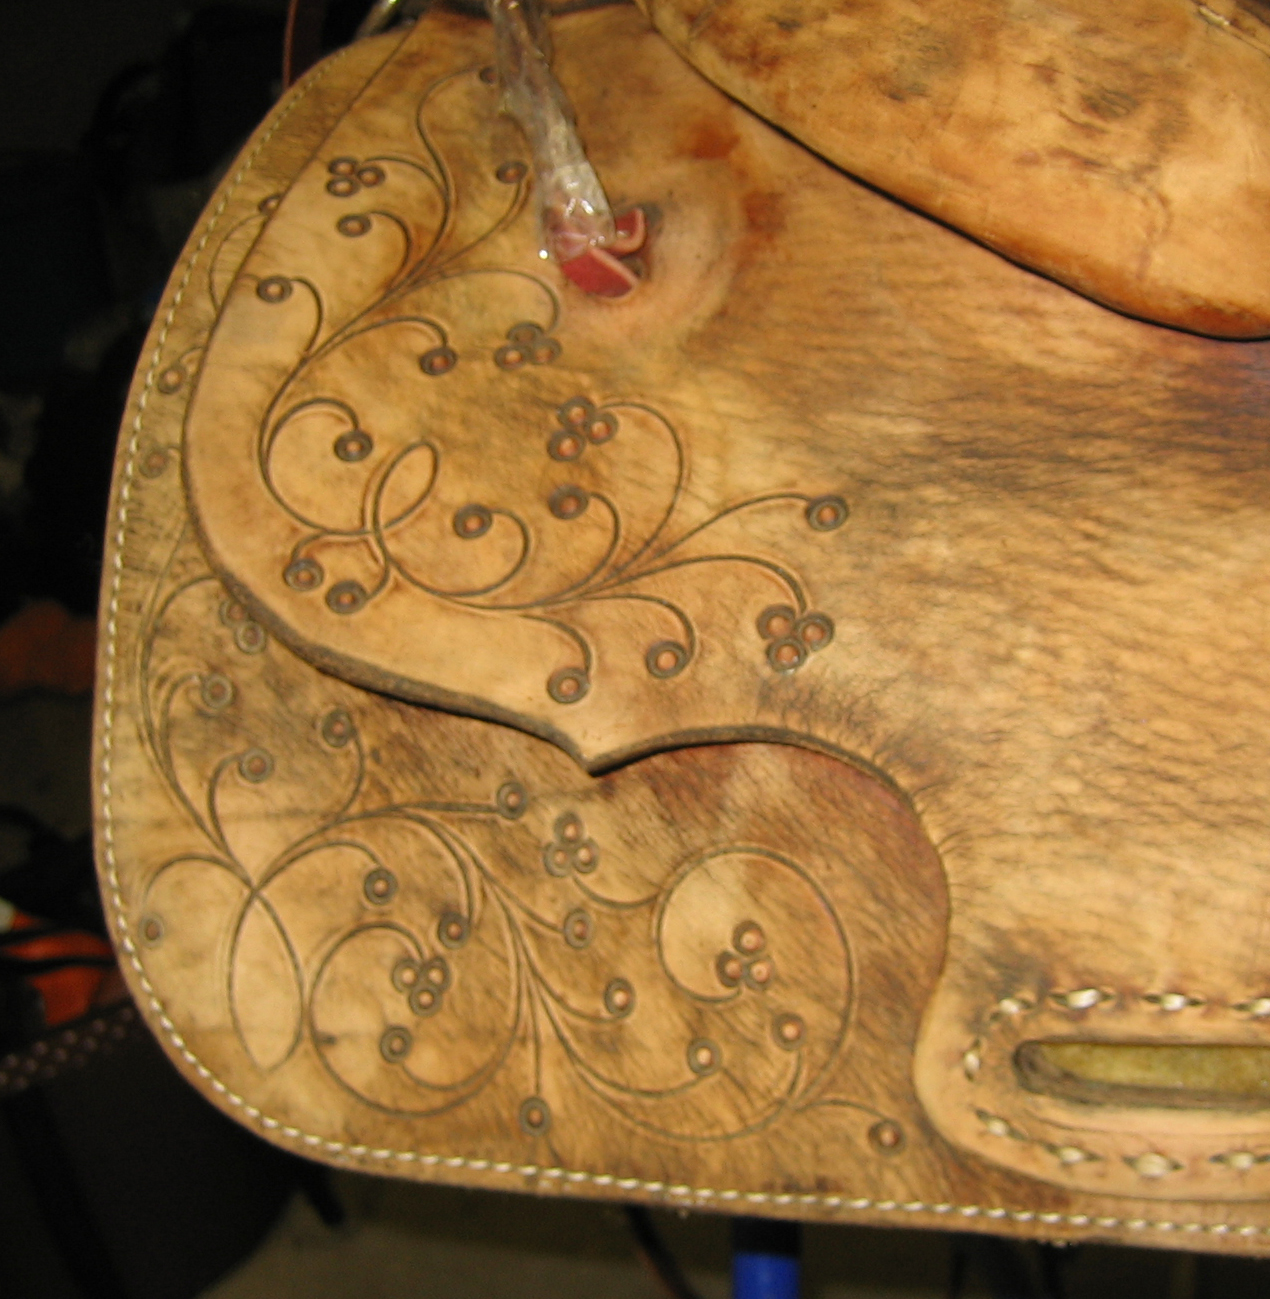 Stolen Western Saddle - Report sightings to the Kentucky State Police